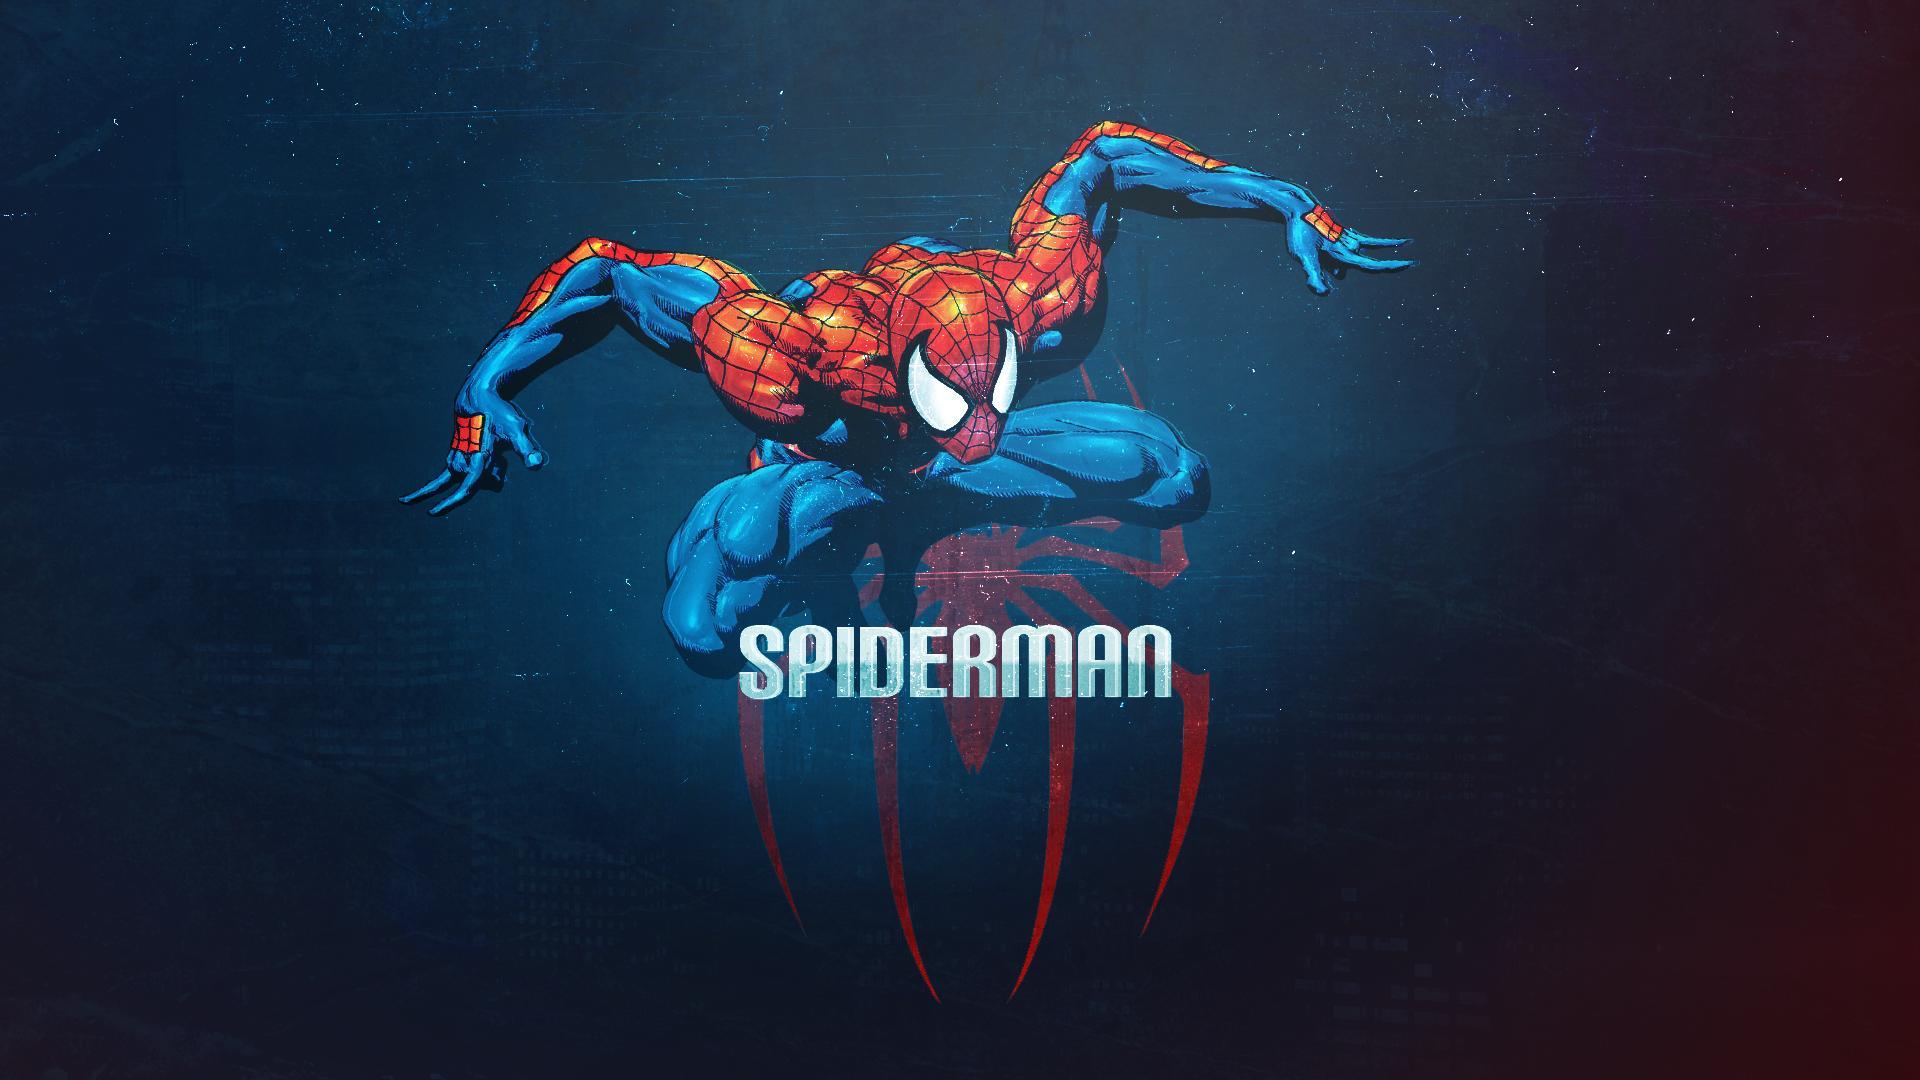 Awesome Spider Man Wallpaper! 1920x1080 X Post From R Marvel